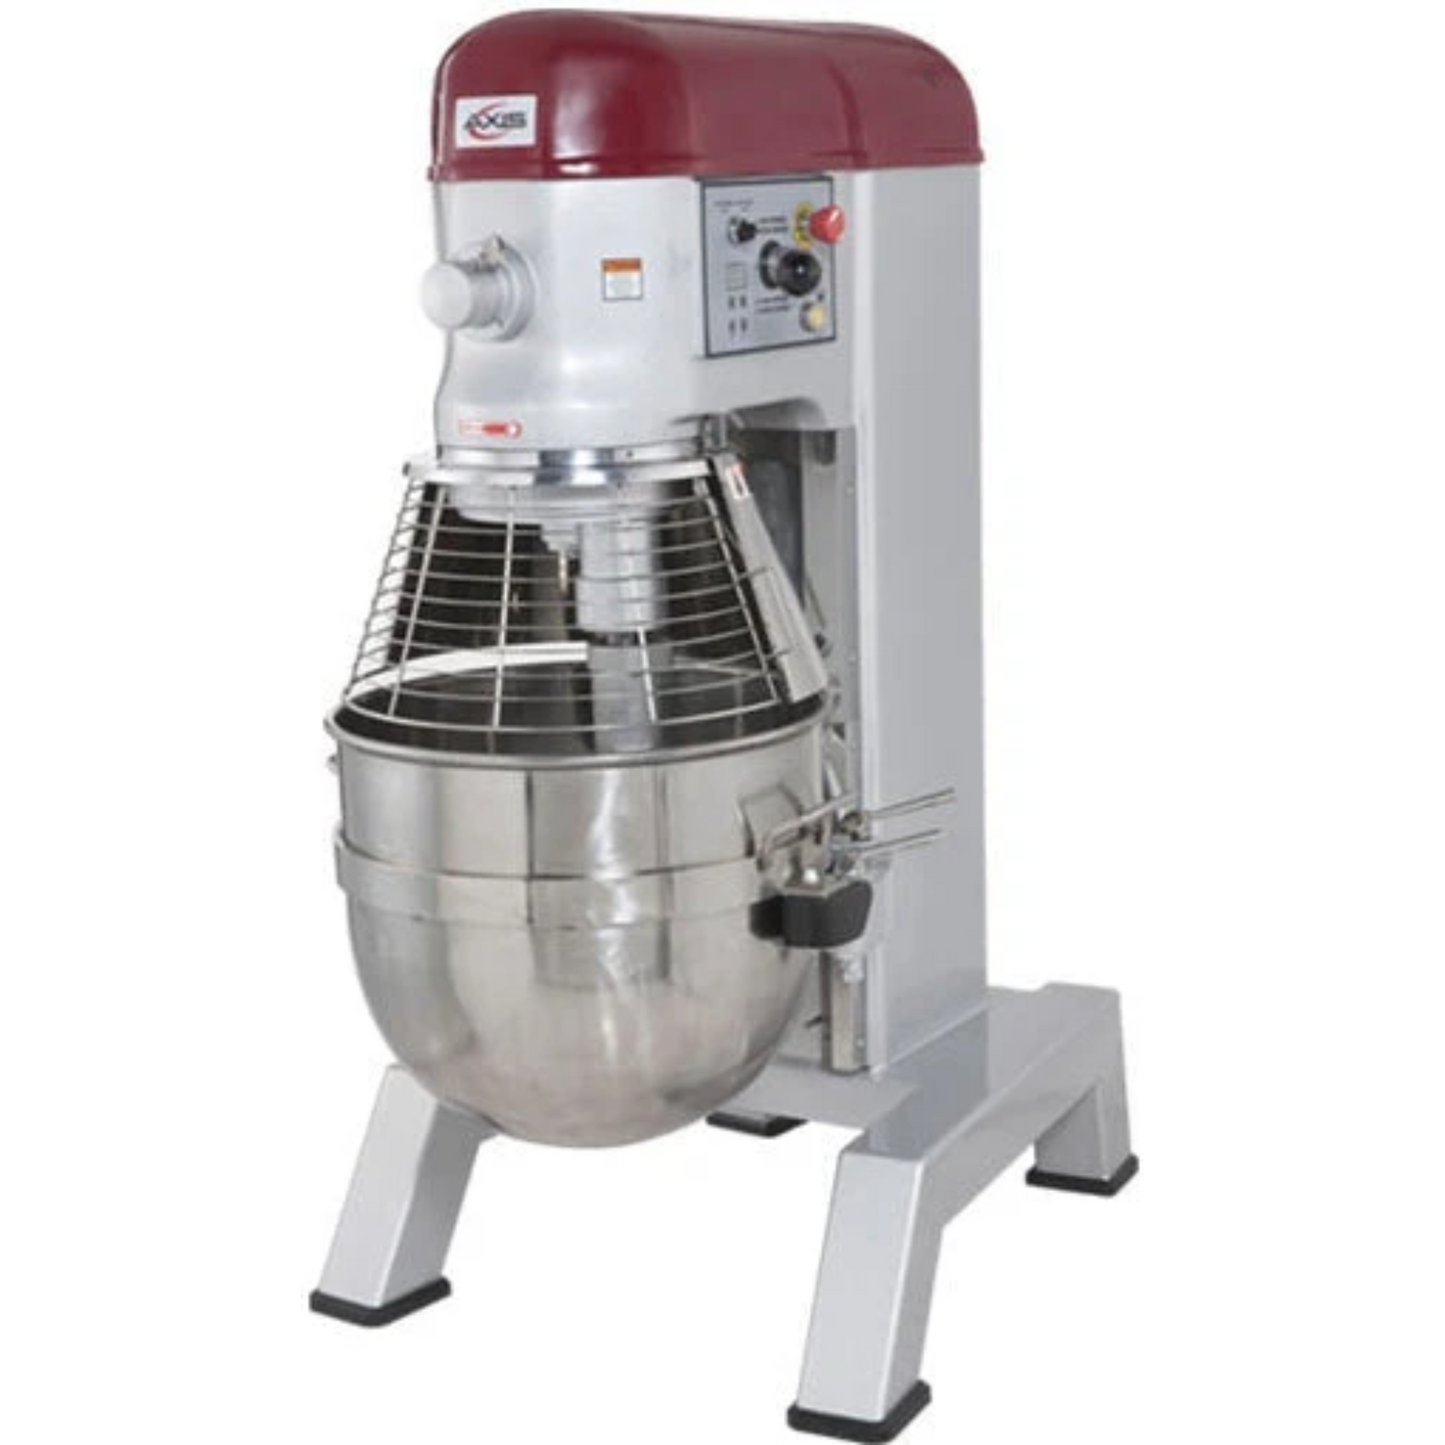 Axis AX-M80 Floor Model 80 Quart Planetary Mixer with Timer, 3-Speed, 4 HP